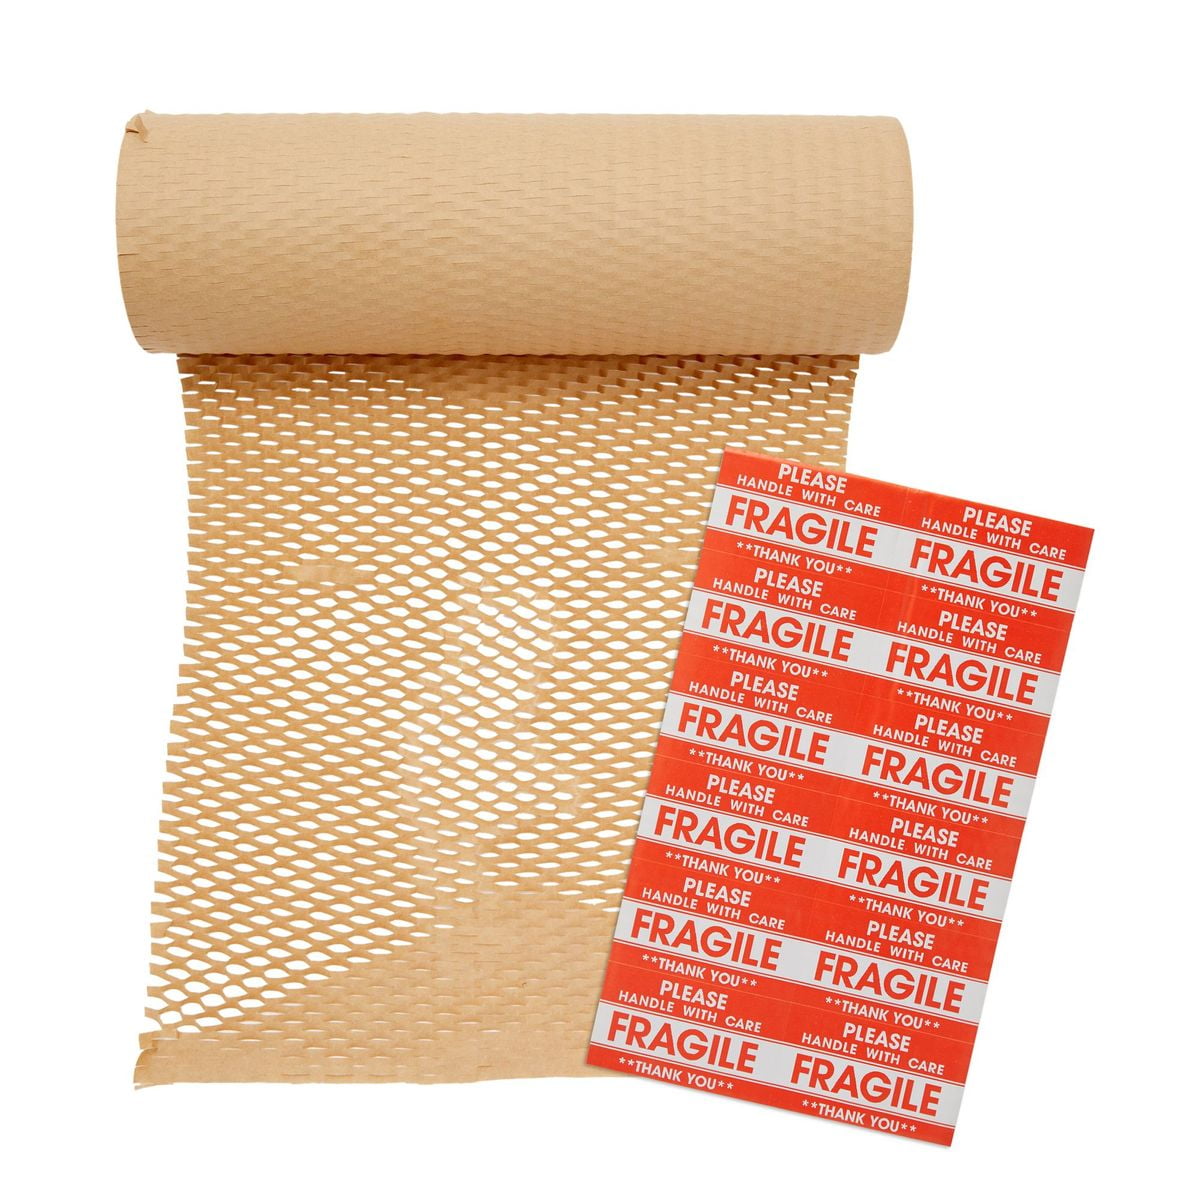 Honeycomb Packaging Paper Cushioning Wrap Paper 12 Inch x 164 Feet Packaging Wrapping Paper Kraft Protective Packaging Paper Wrap Roll with 500 Pieces Fragile Sticker Labels for Packing and Moving 